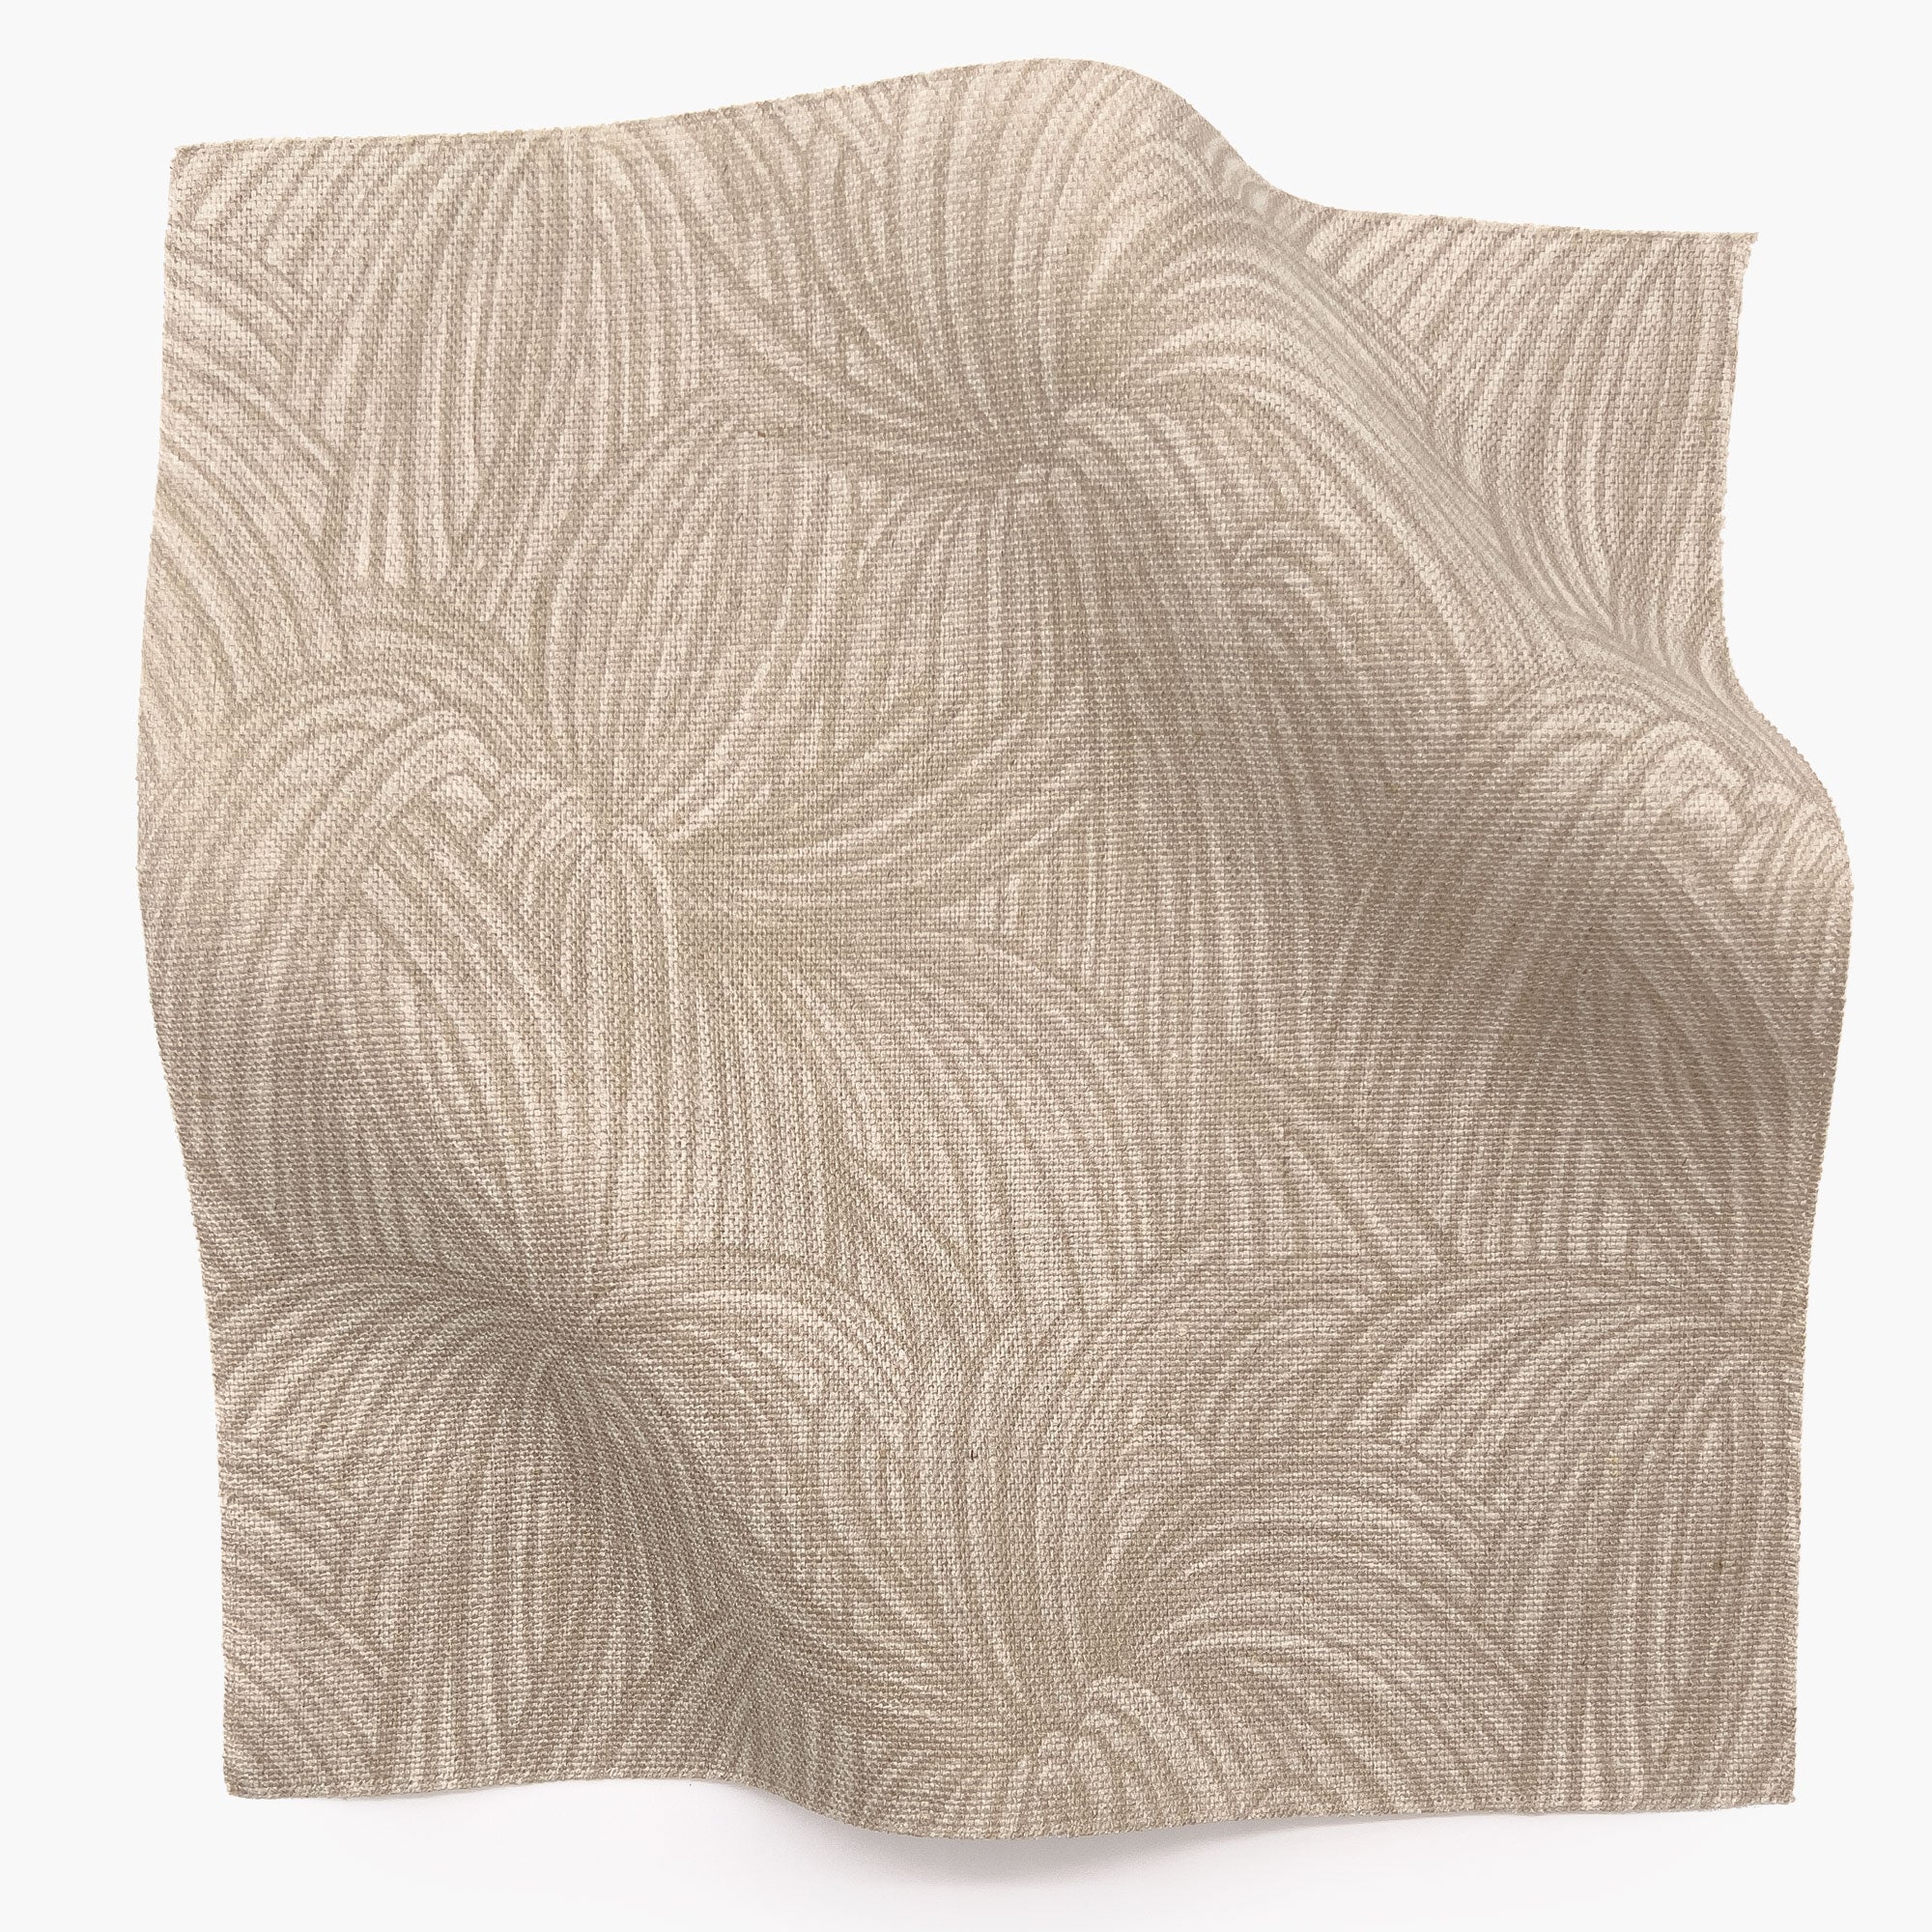 Square fabric swatch in a textural painted print in tan on a cream field.